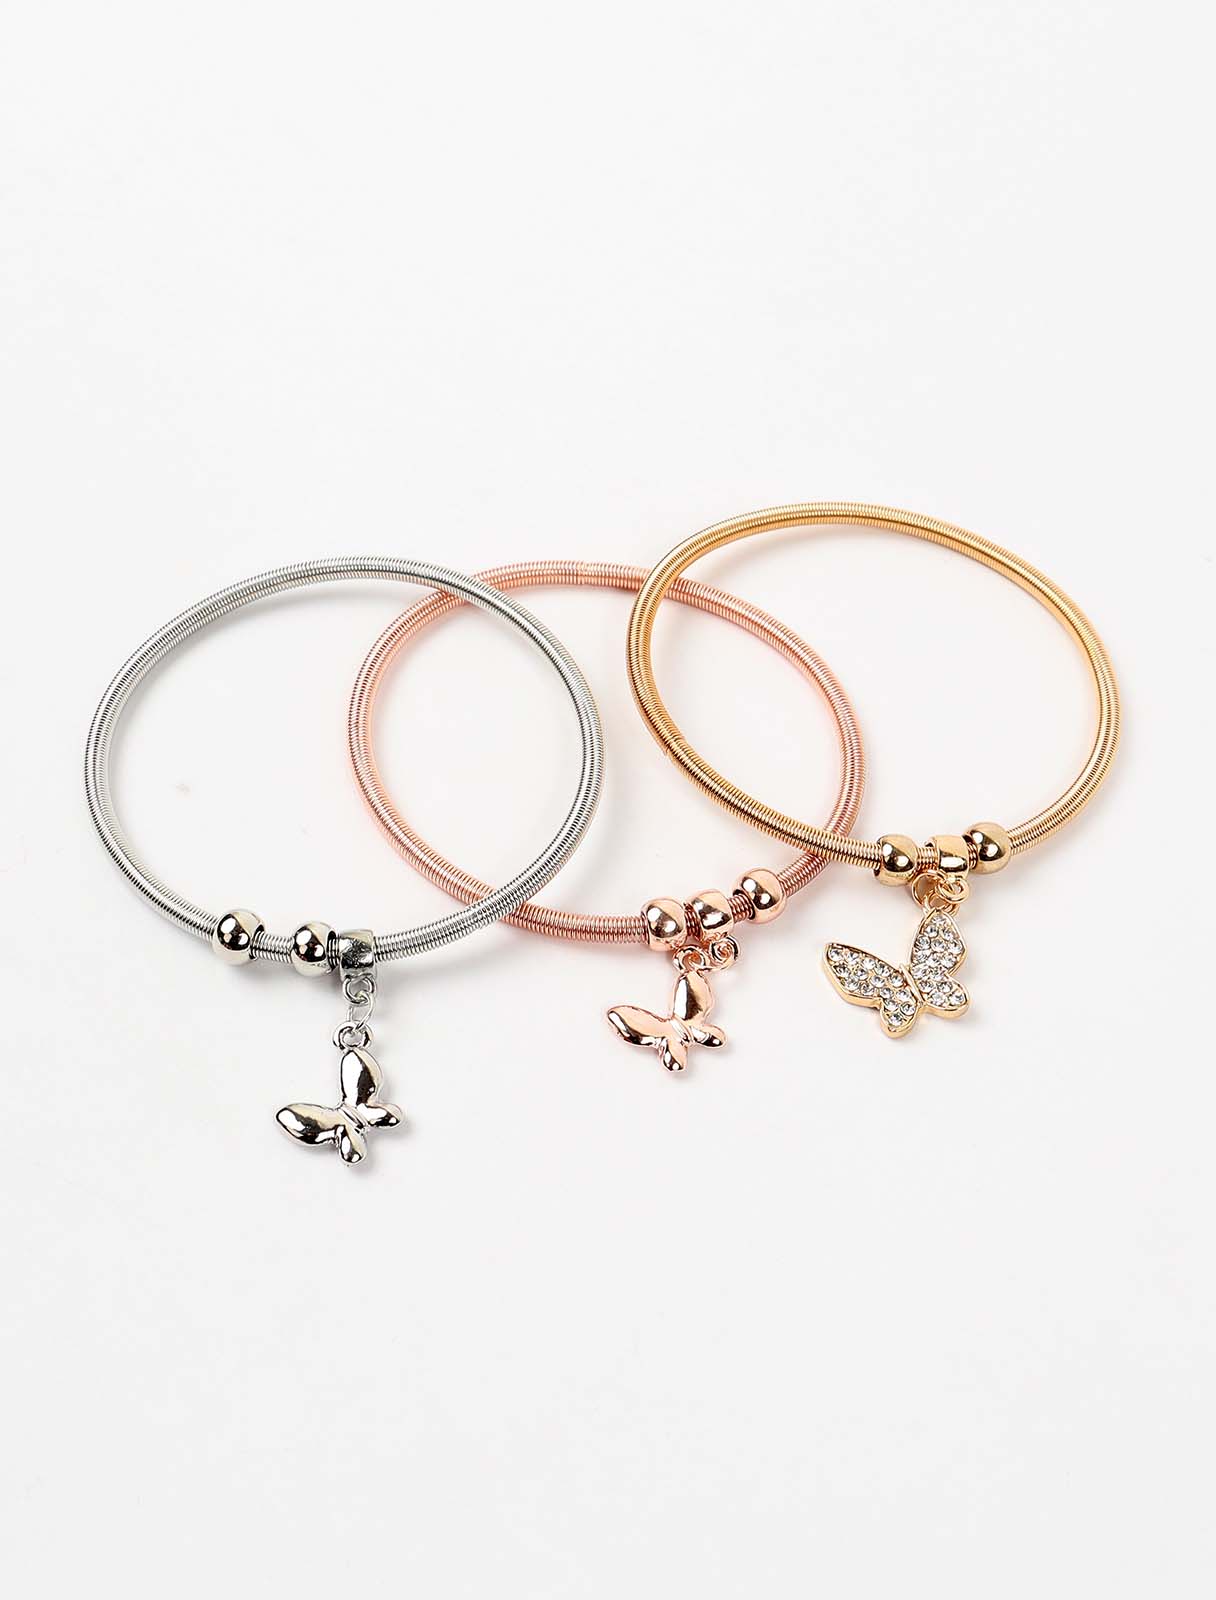 3 pieces bracelet in different colors with butterfly pendants